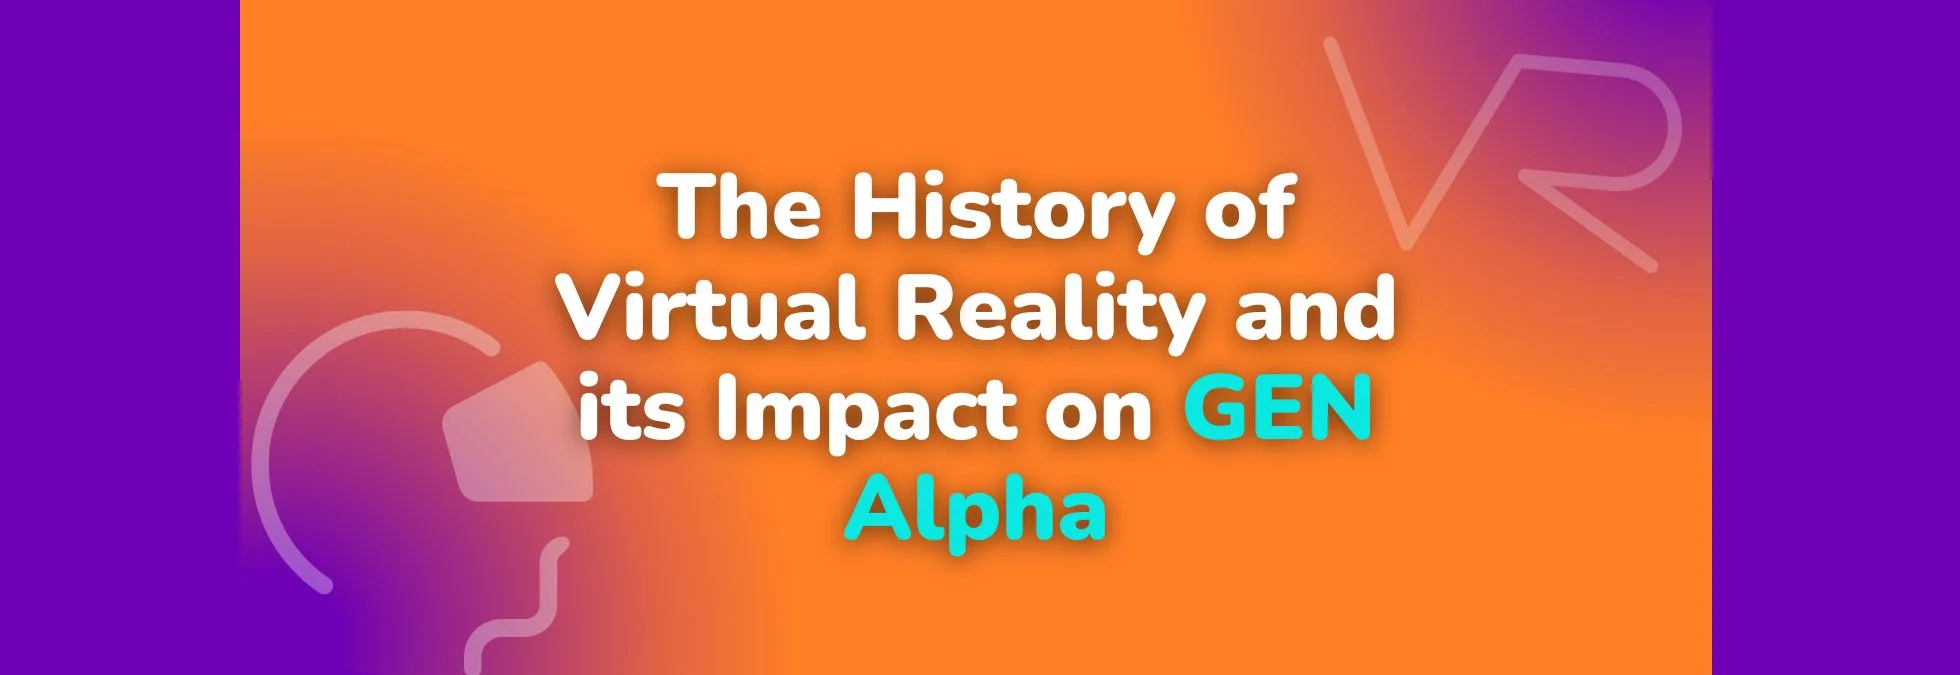 The History of Virtual Reality